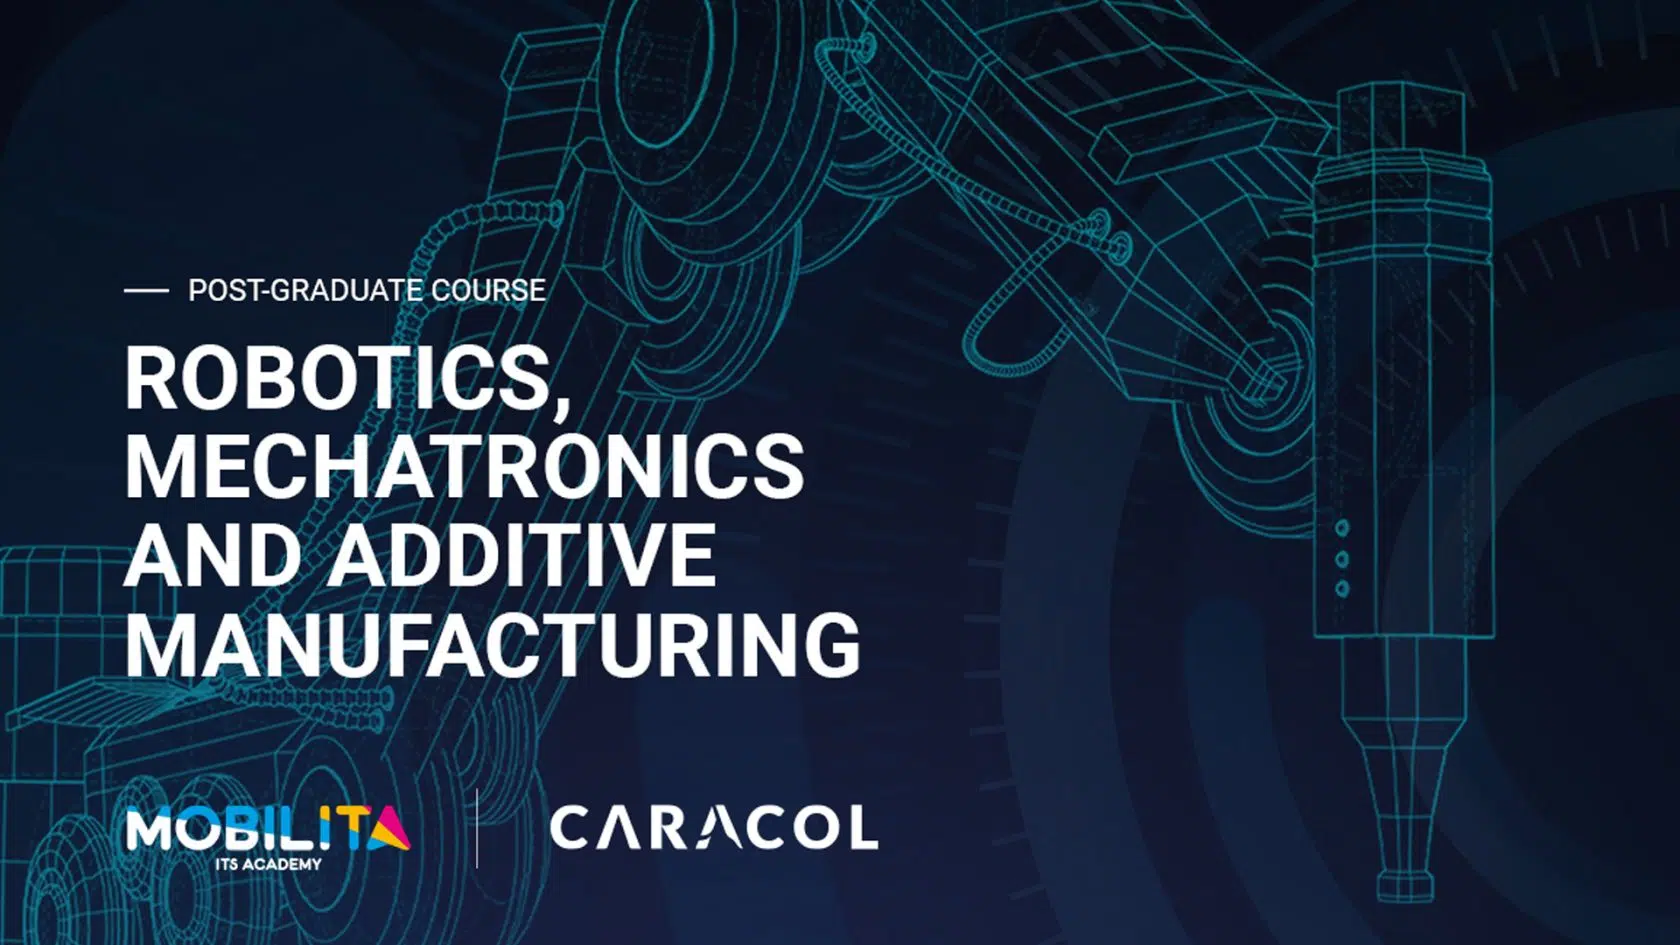 Caracol and Mobilita join forces for the post-graduate on Robotics, Mechatronics and Additive Manufacturing image